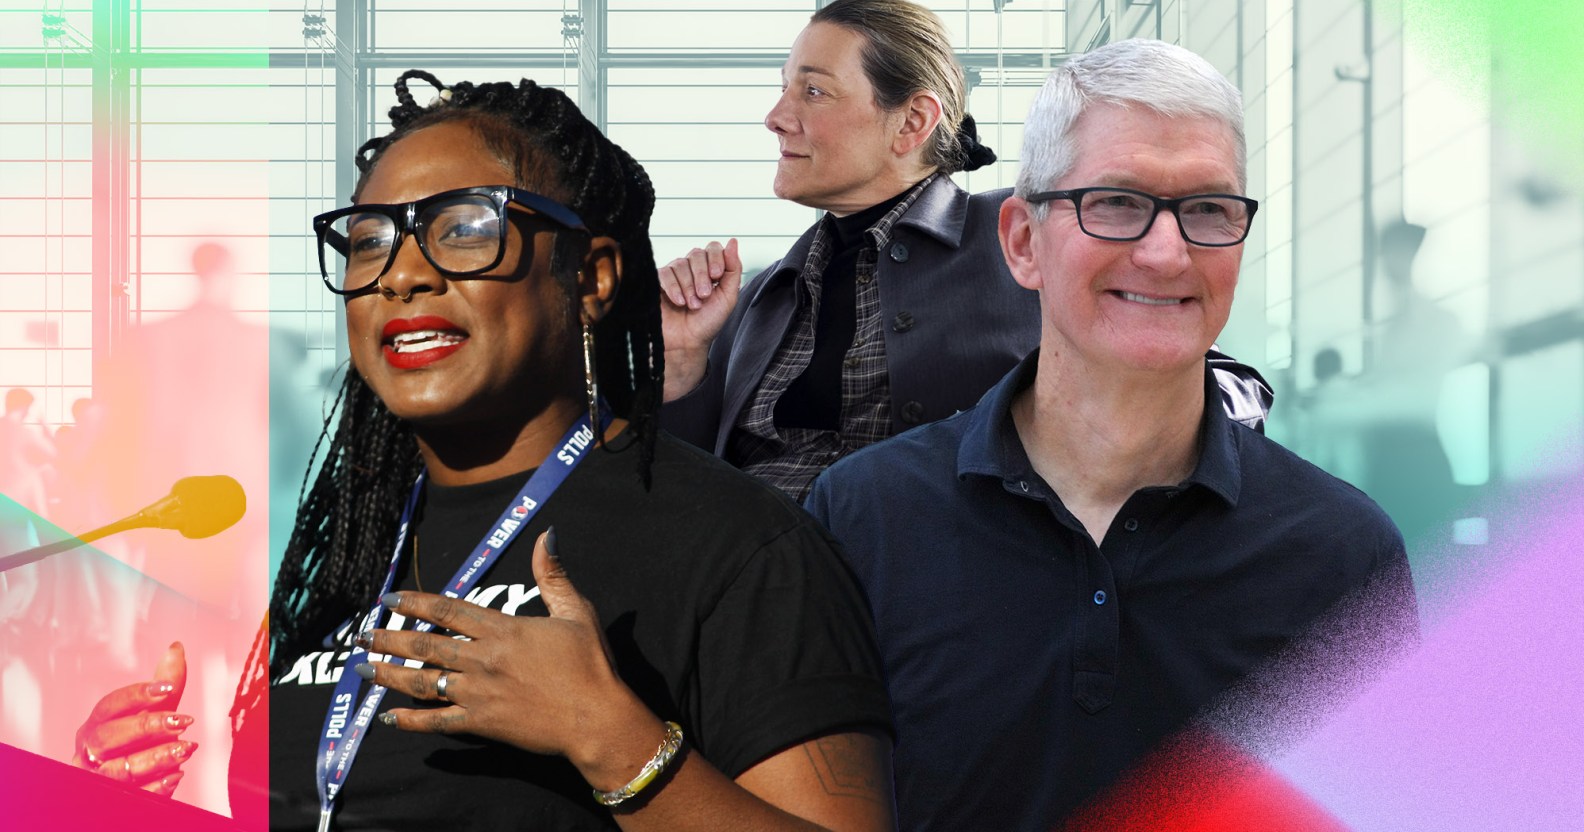 Alicia Garza is smilling while speaking. Tim Cook is wearing a black shirt and smiling, and Martine Rothblatt is in the background.